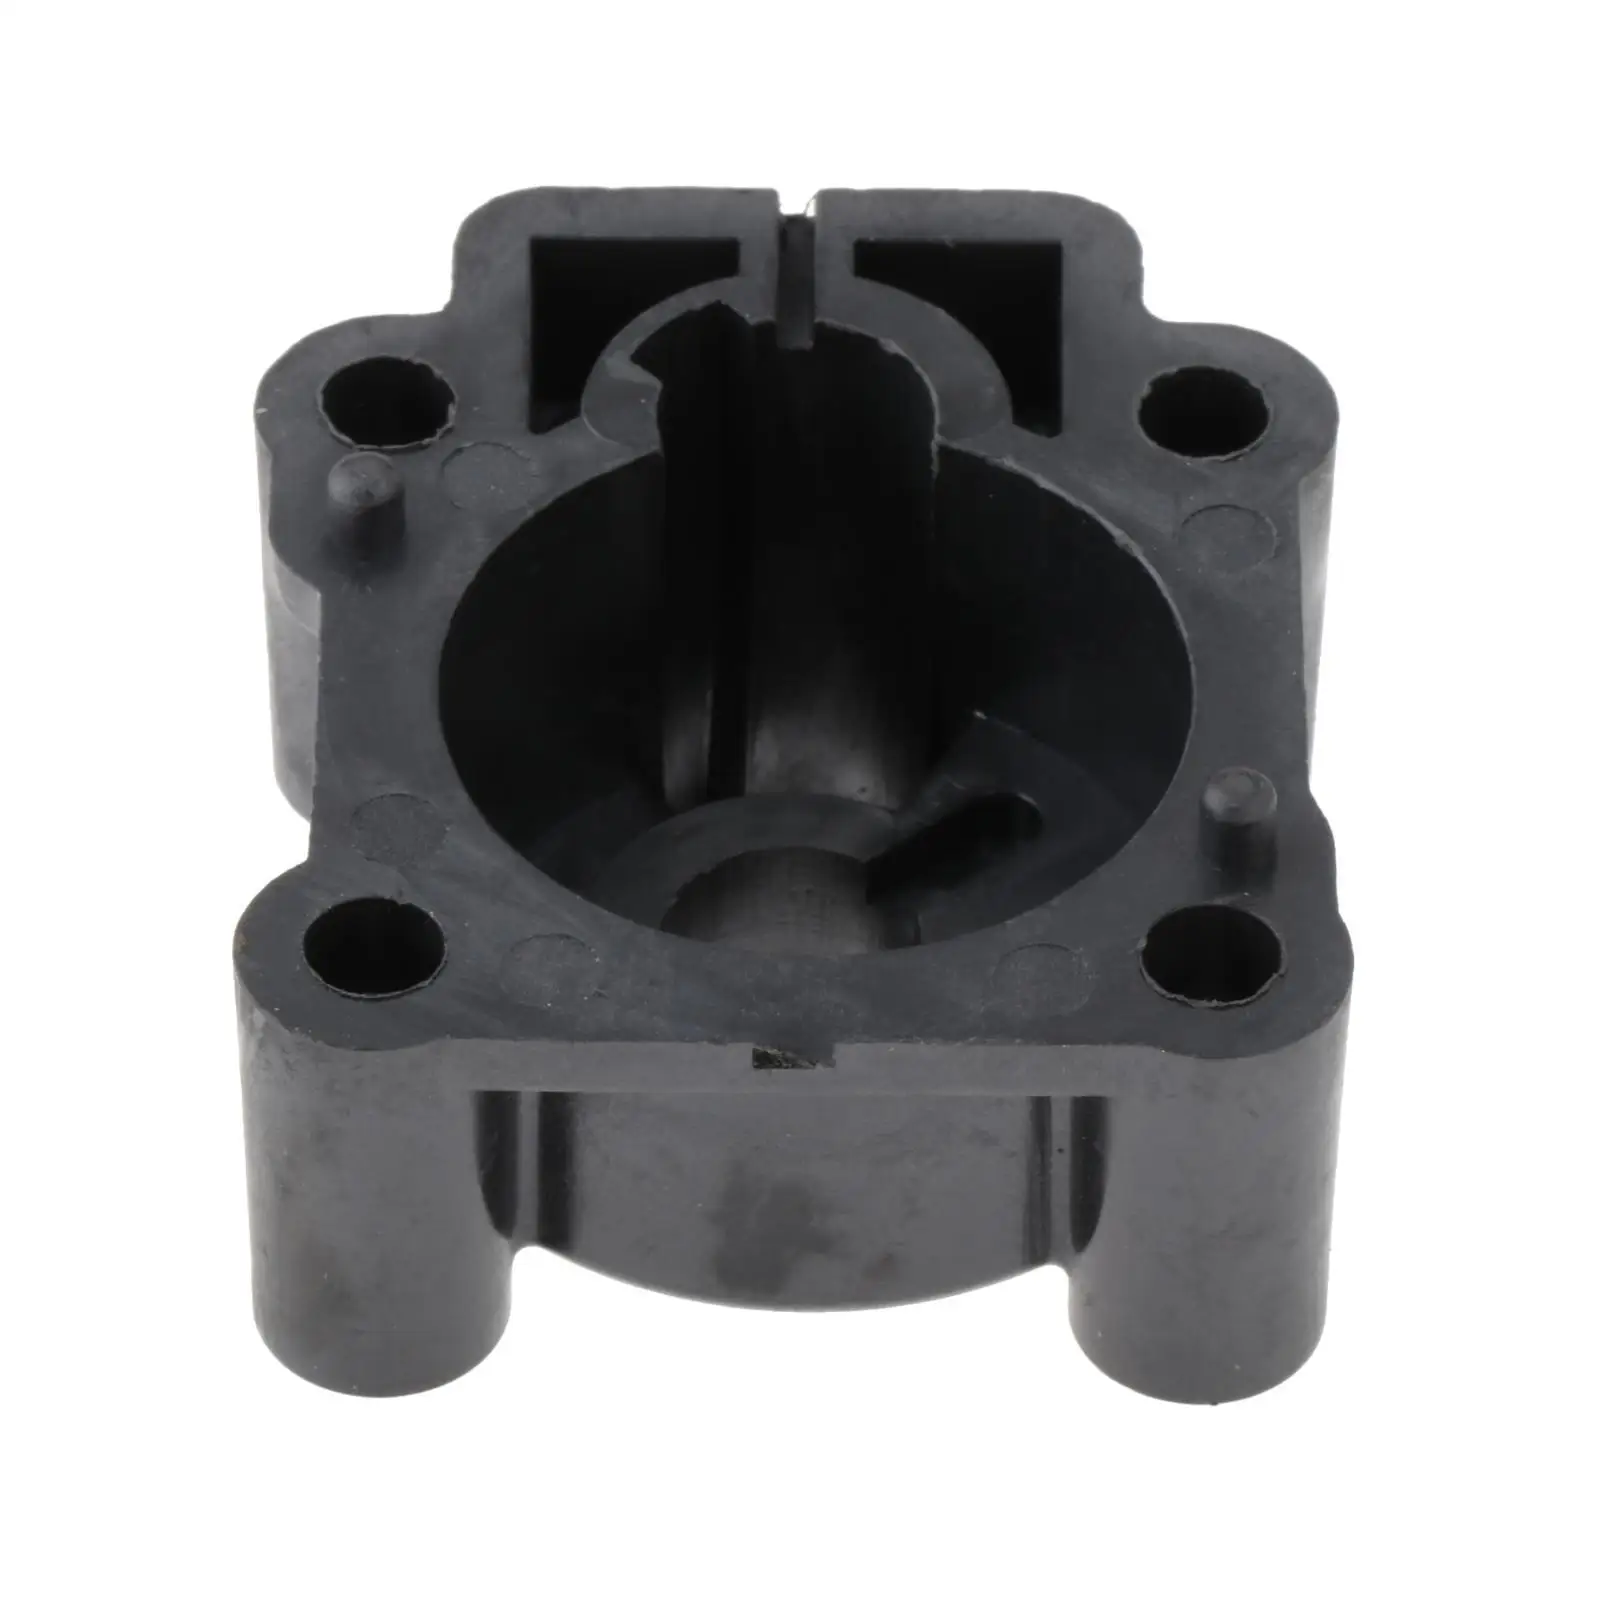 Water Pump Housing Shell 3B2-65016-0 for Nissan Outboard M 8HP 9.8HP Easily Install Vehicle Repair Parts Durable ,Black